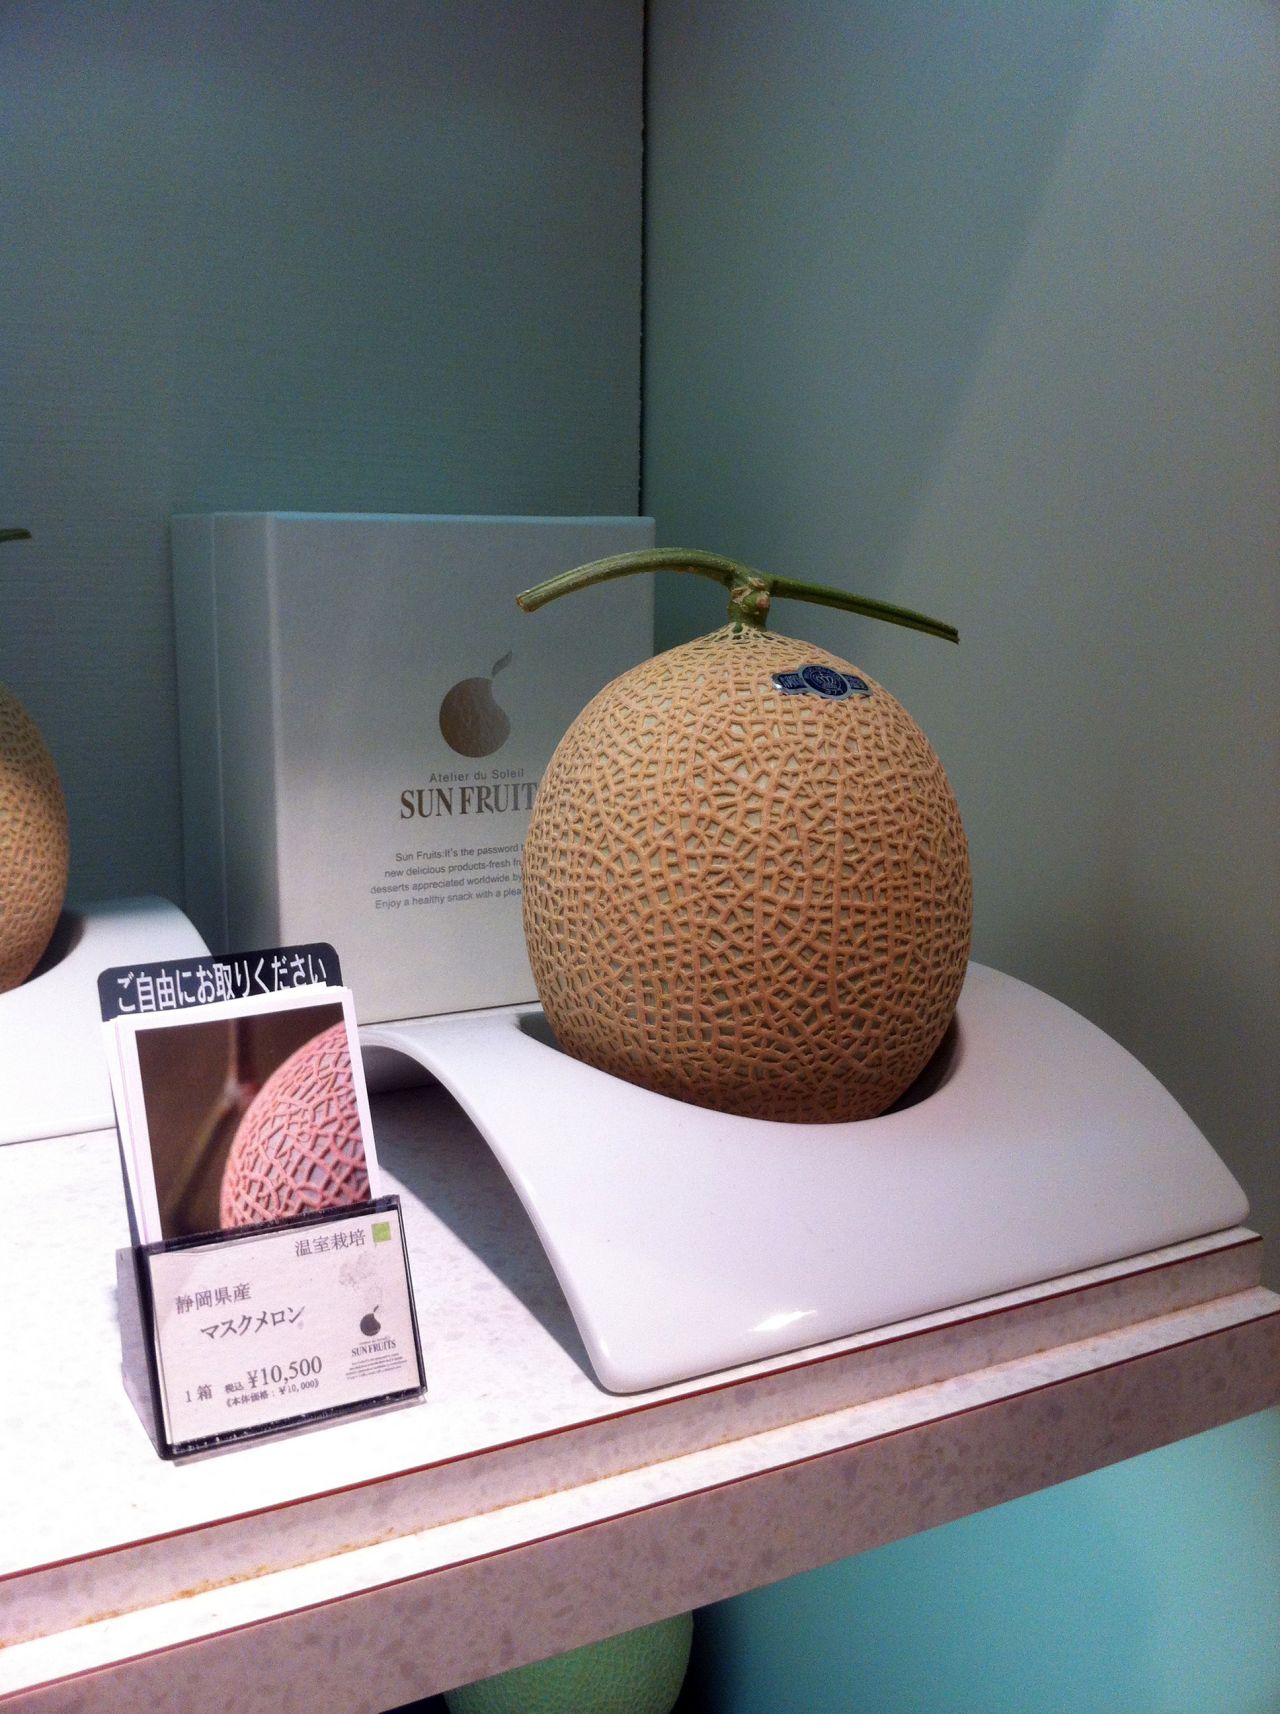 Purity and simplicity are highly valued. This beautifully packaged gift melon is priced at 10,500 yen (more than $130). 